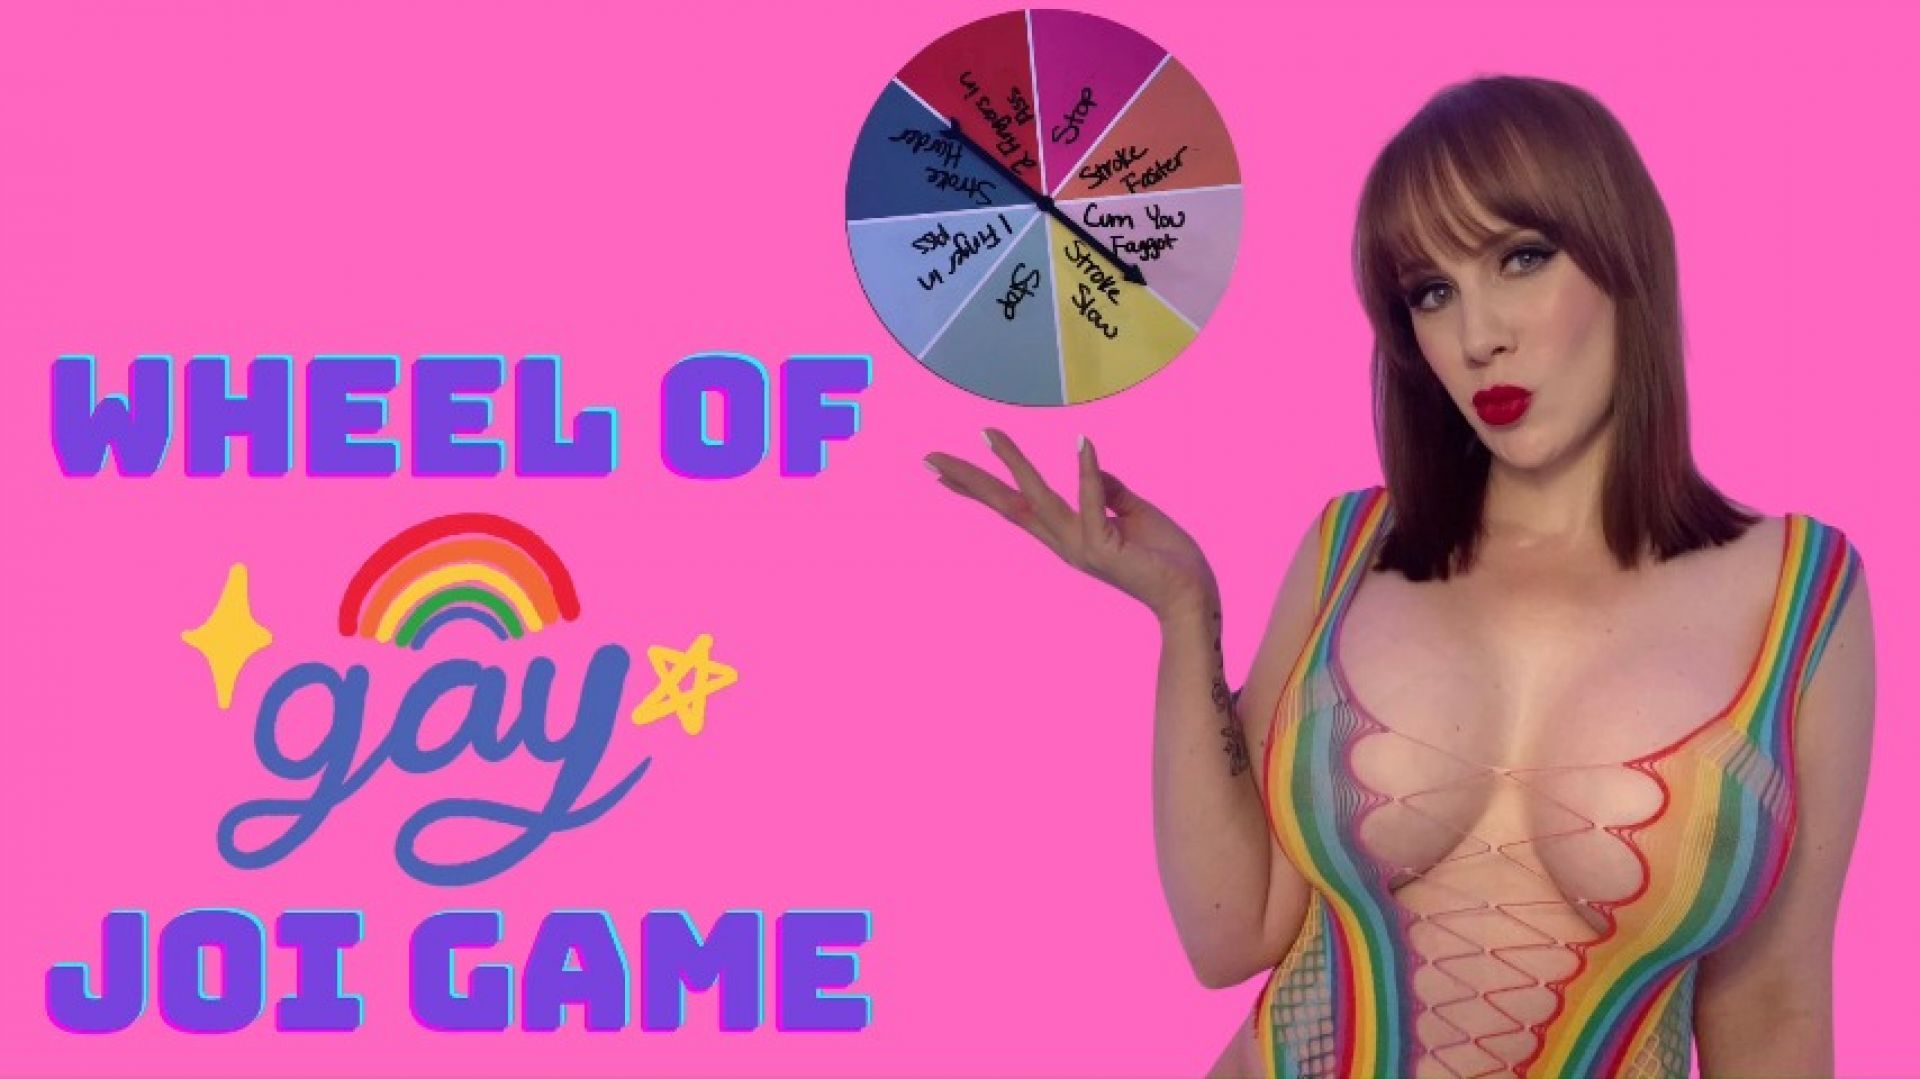 Wheel Of Gay JOI Game